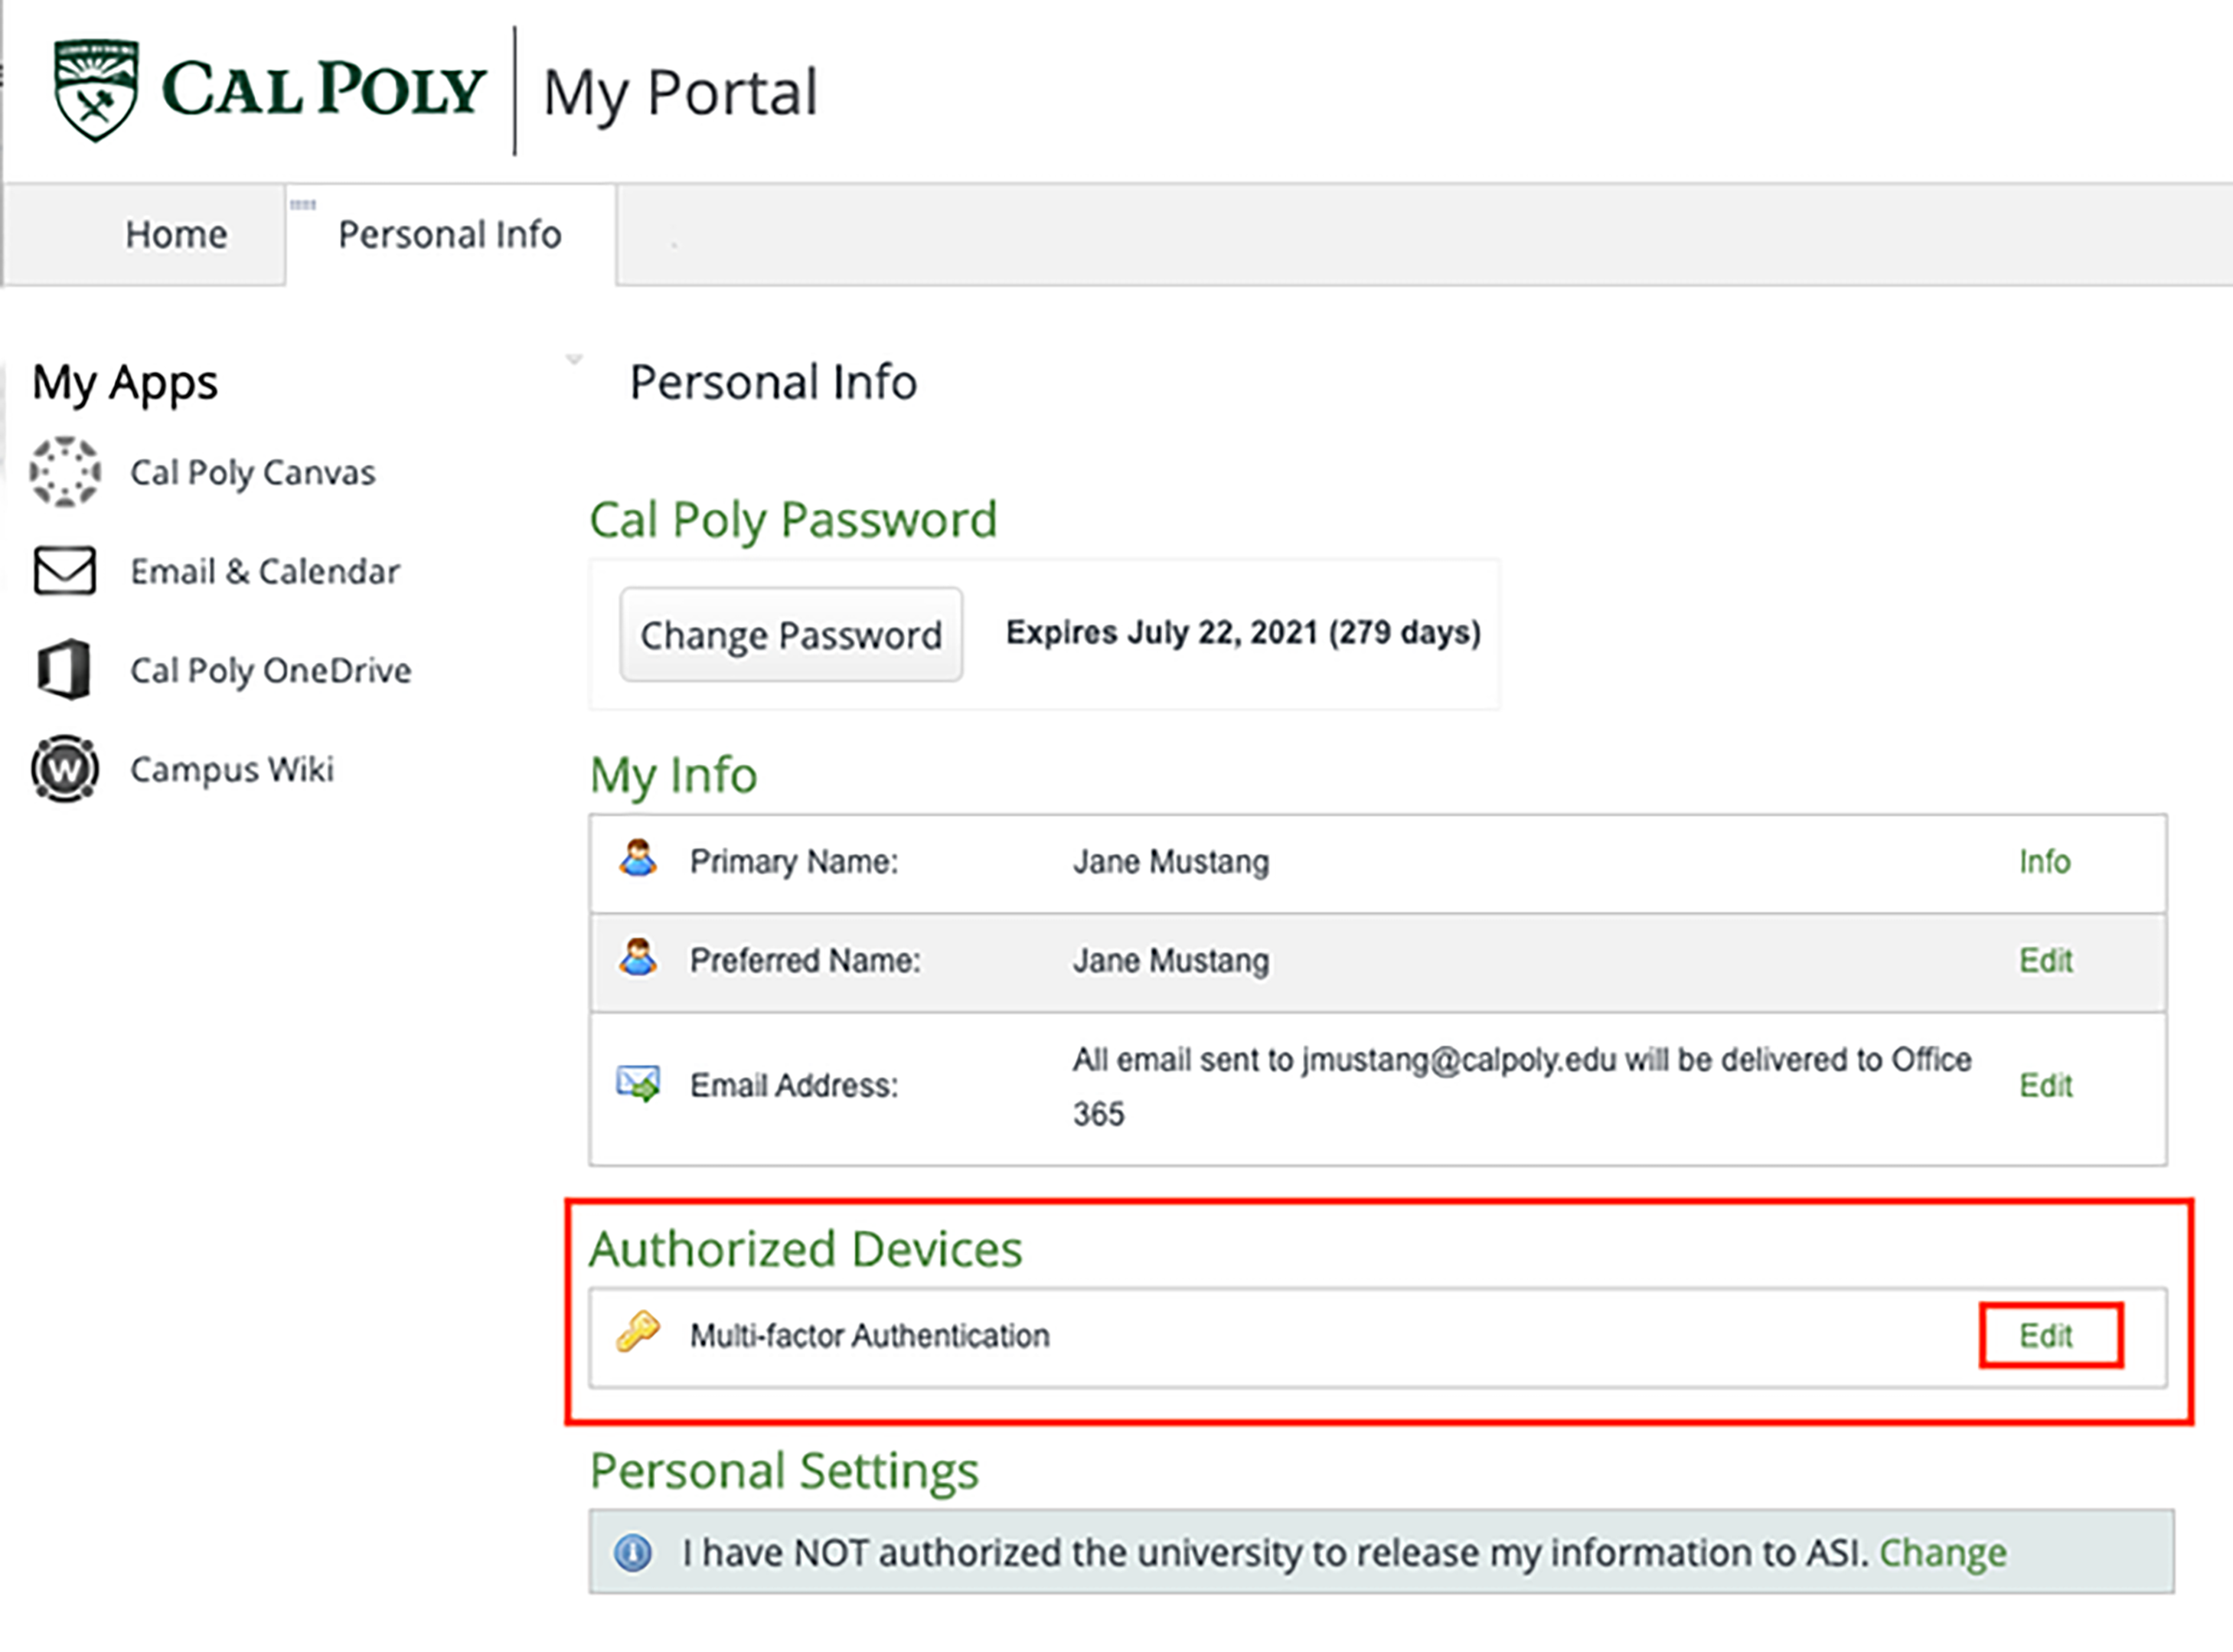 Cal Poly portal personal Info panel with Authorized Devices section and Edit button both highlighted.